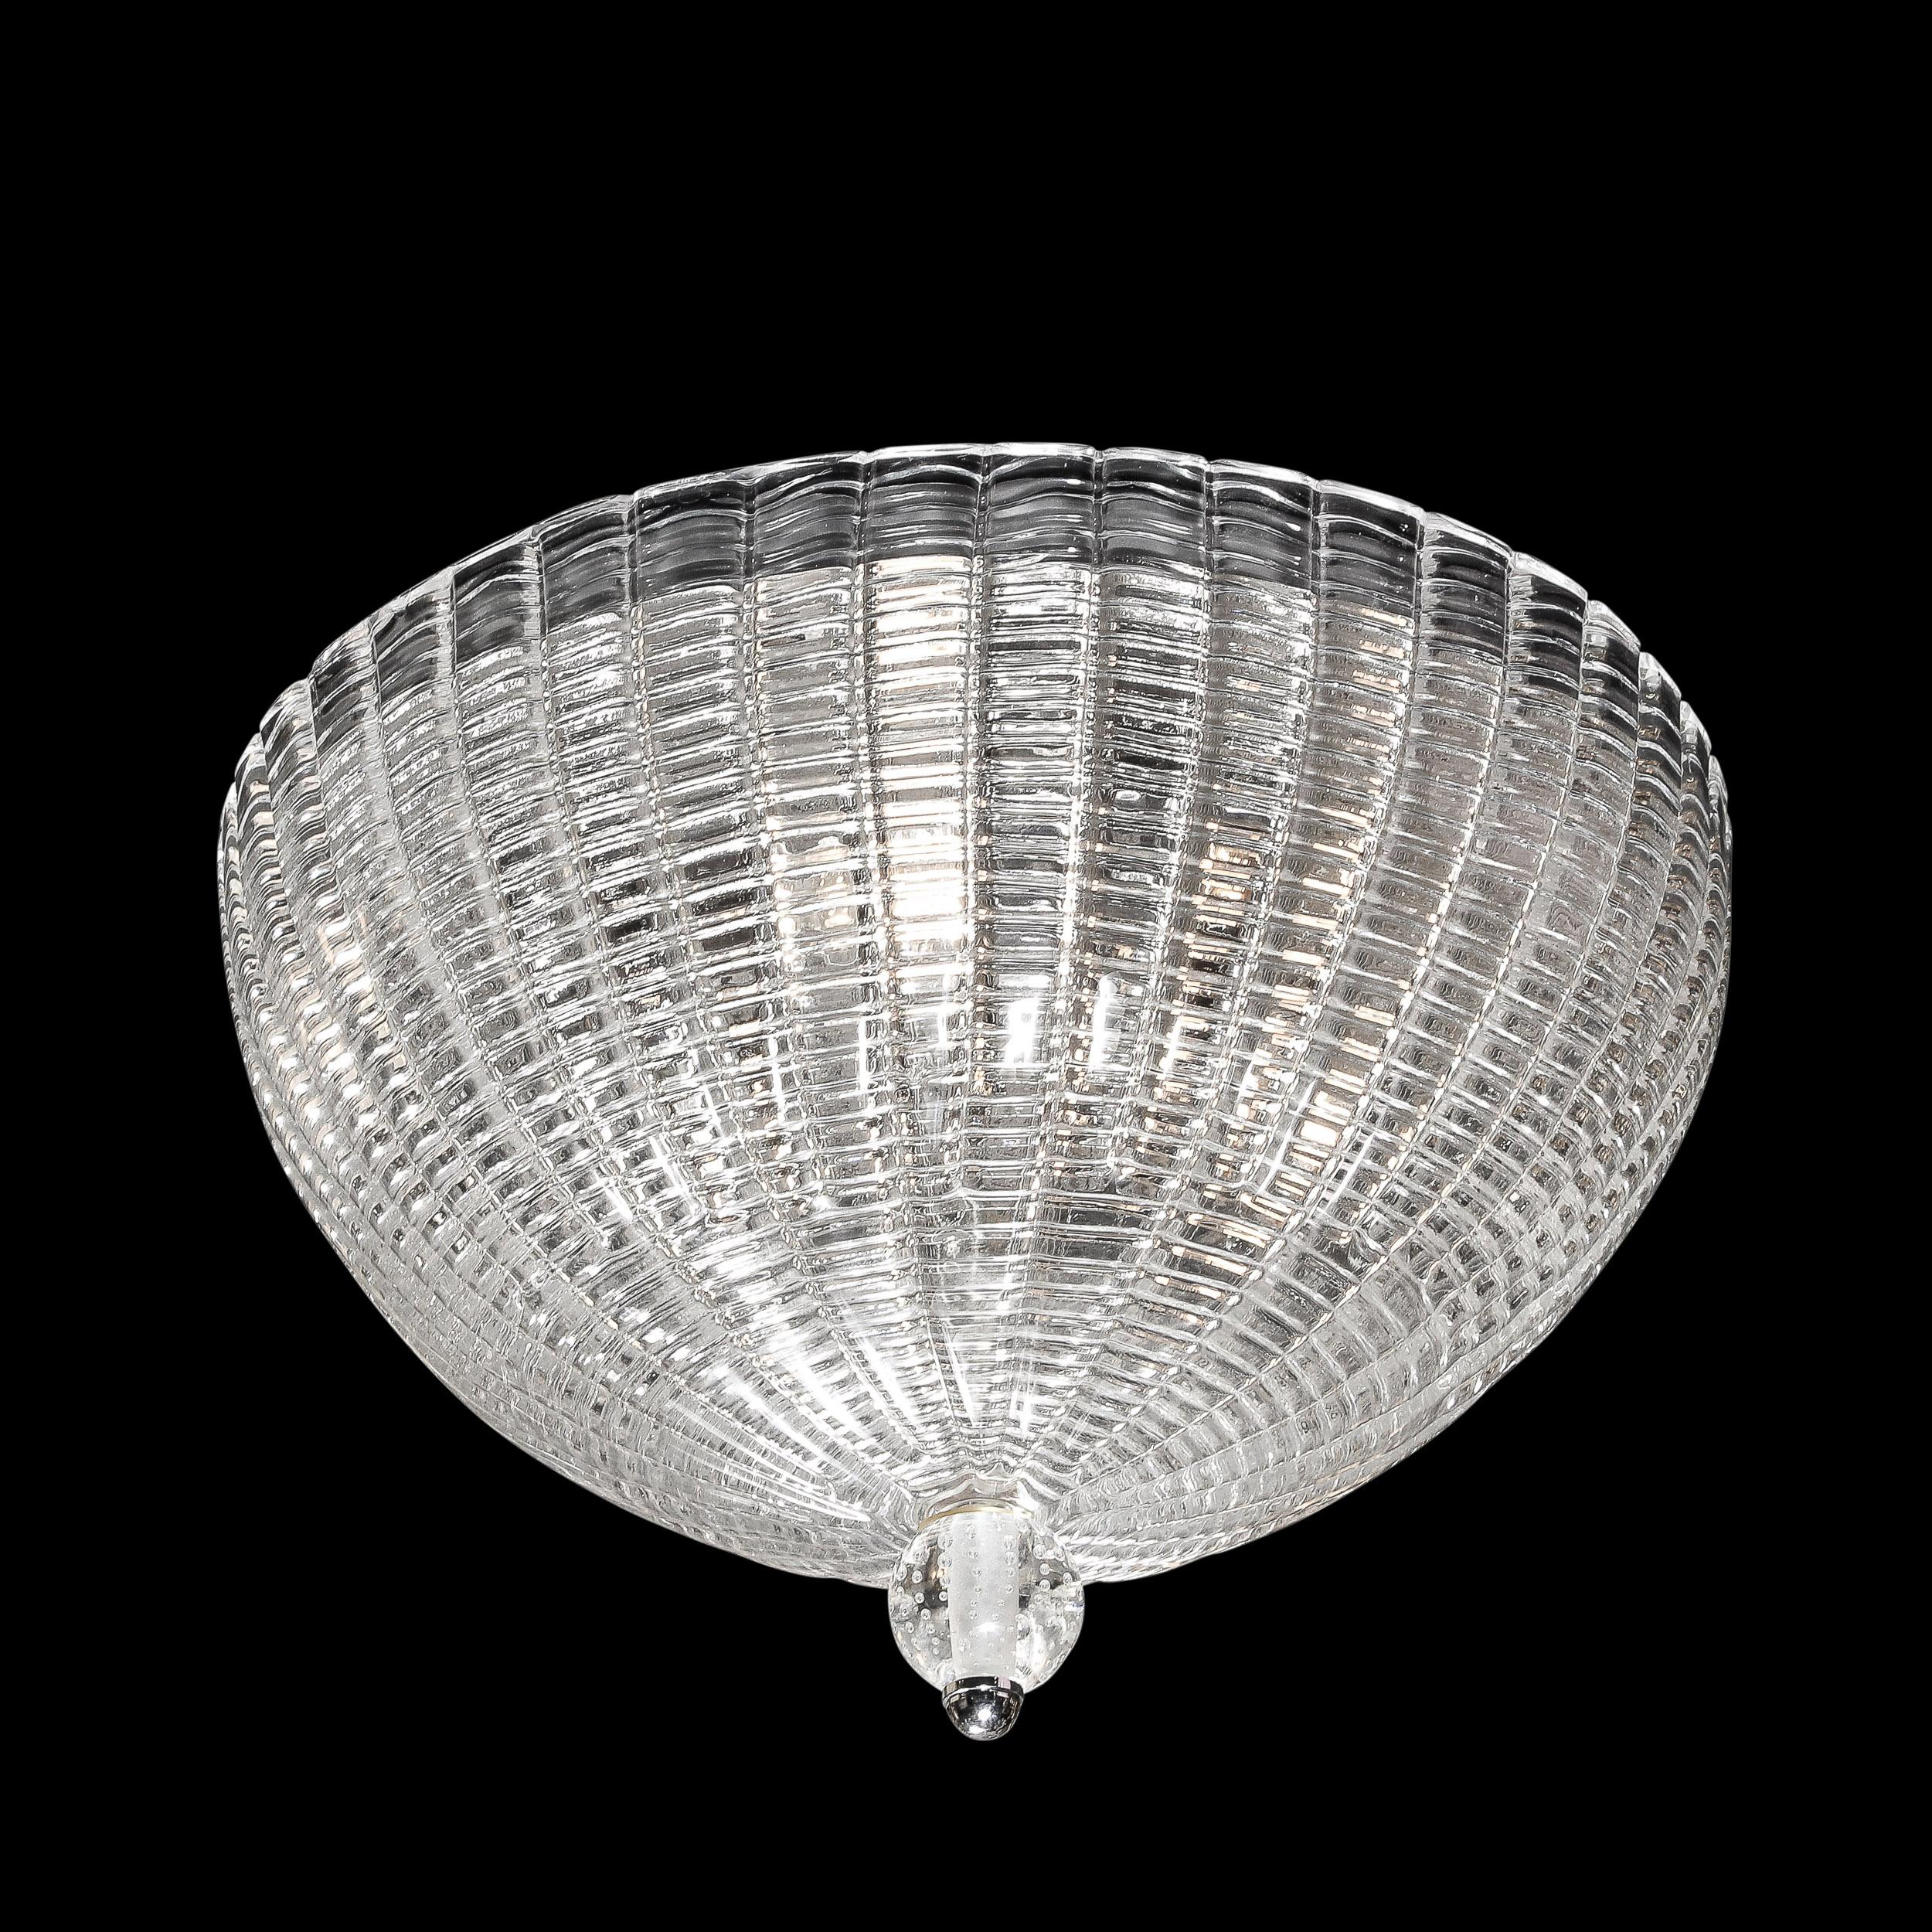 This stunning modernist flush mount was realized in Murano, Italy- the island off the coast of Venice renowned for centuries for its superlative glass production- during the latter half of the 20th century. Executed in the manner of the fabled